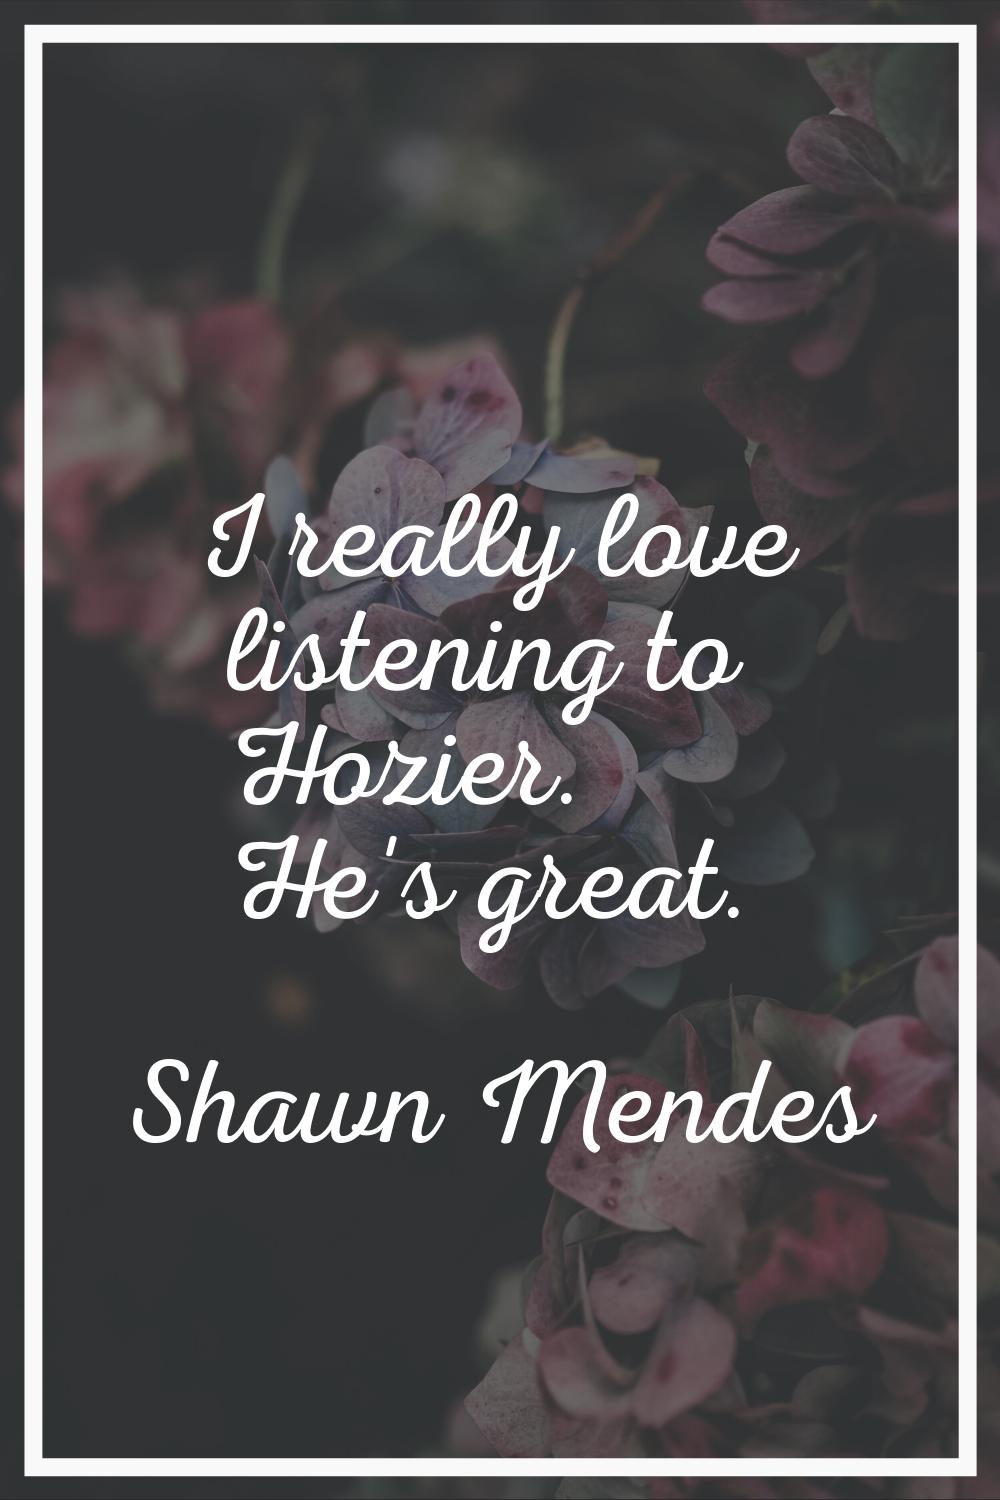 I really love listening to Hozier. He's great.